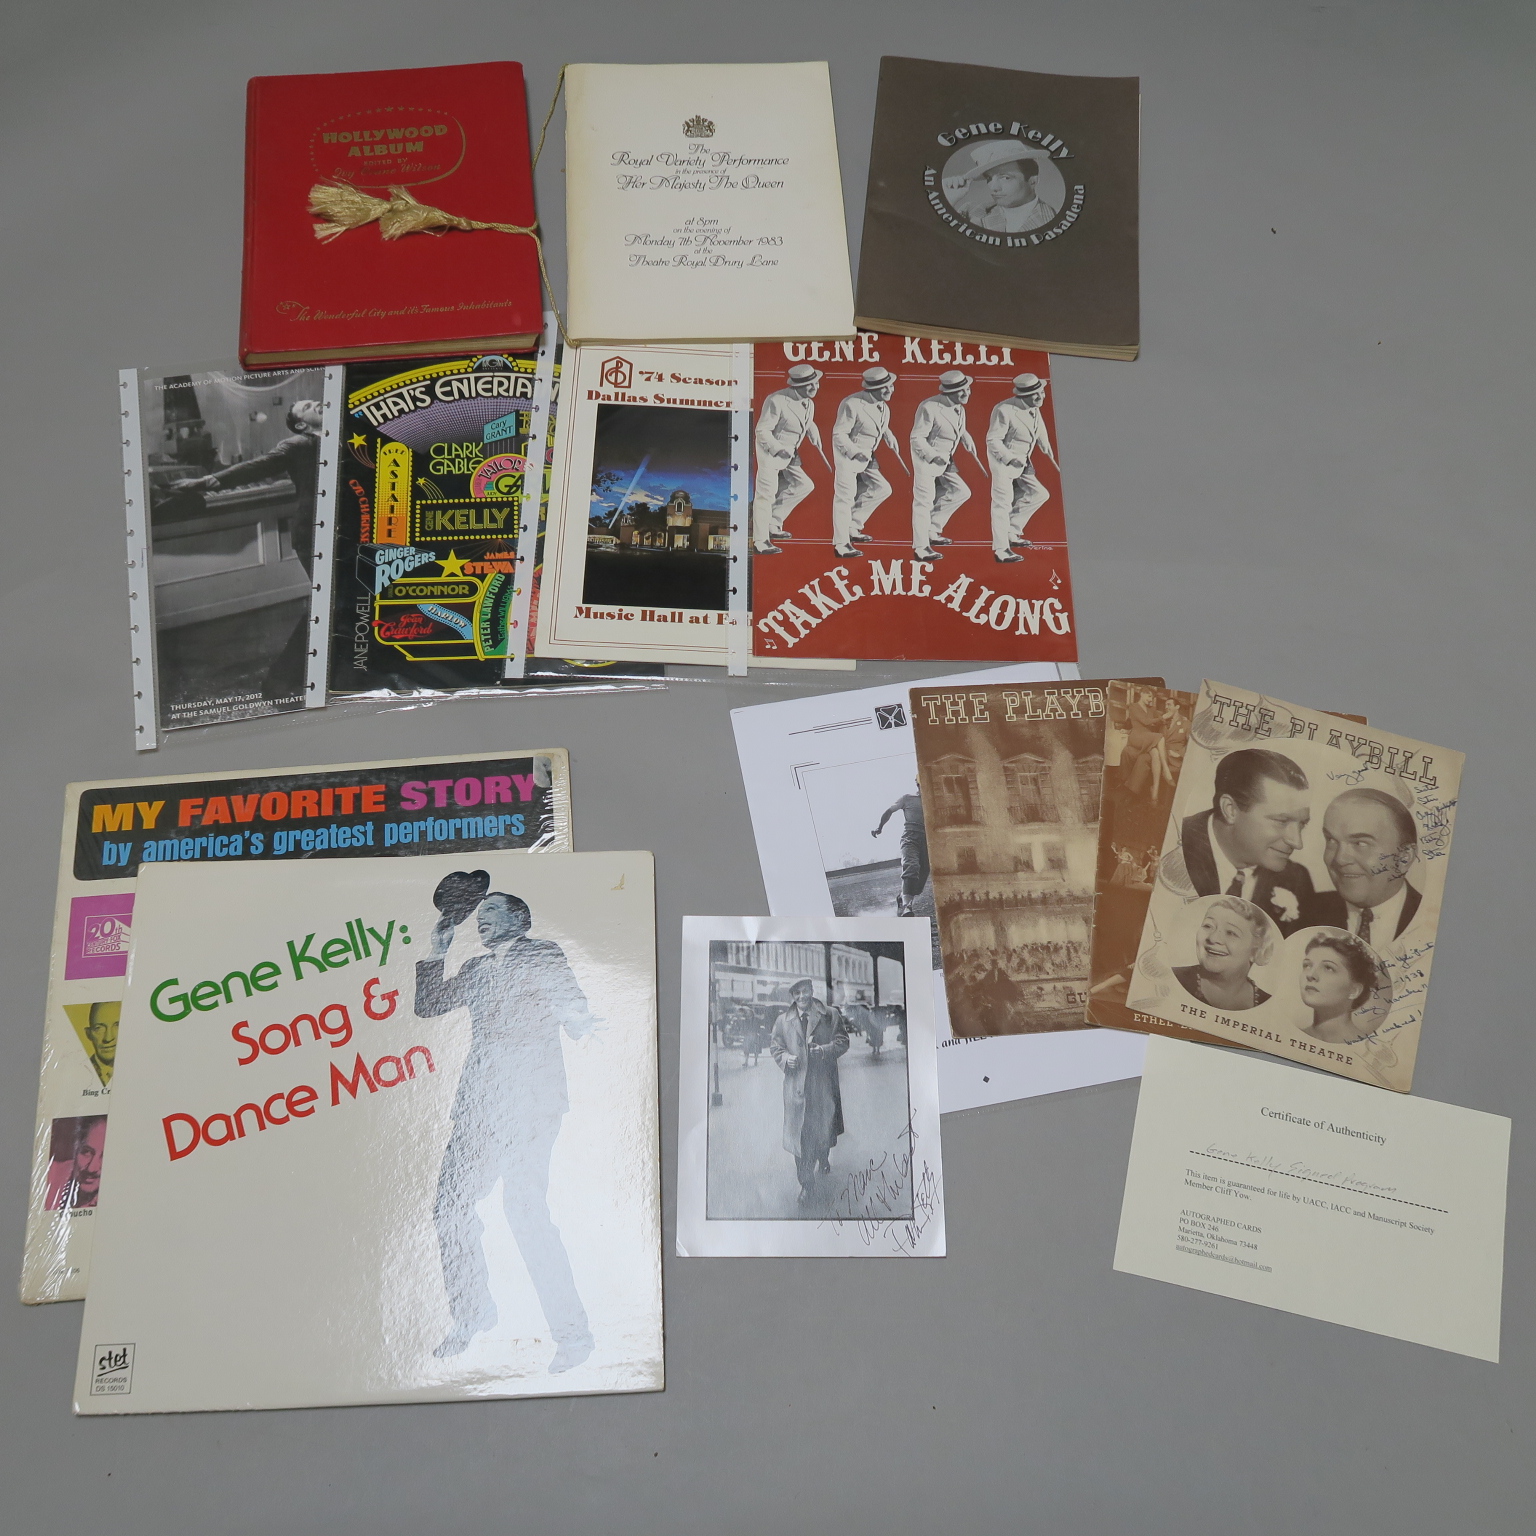 Gene Kelly signed photo with other memorabilia including 2 Gene Kelly records, Holly Wood Album,